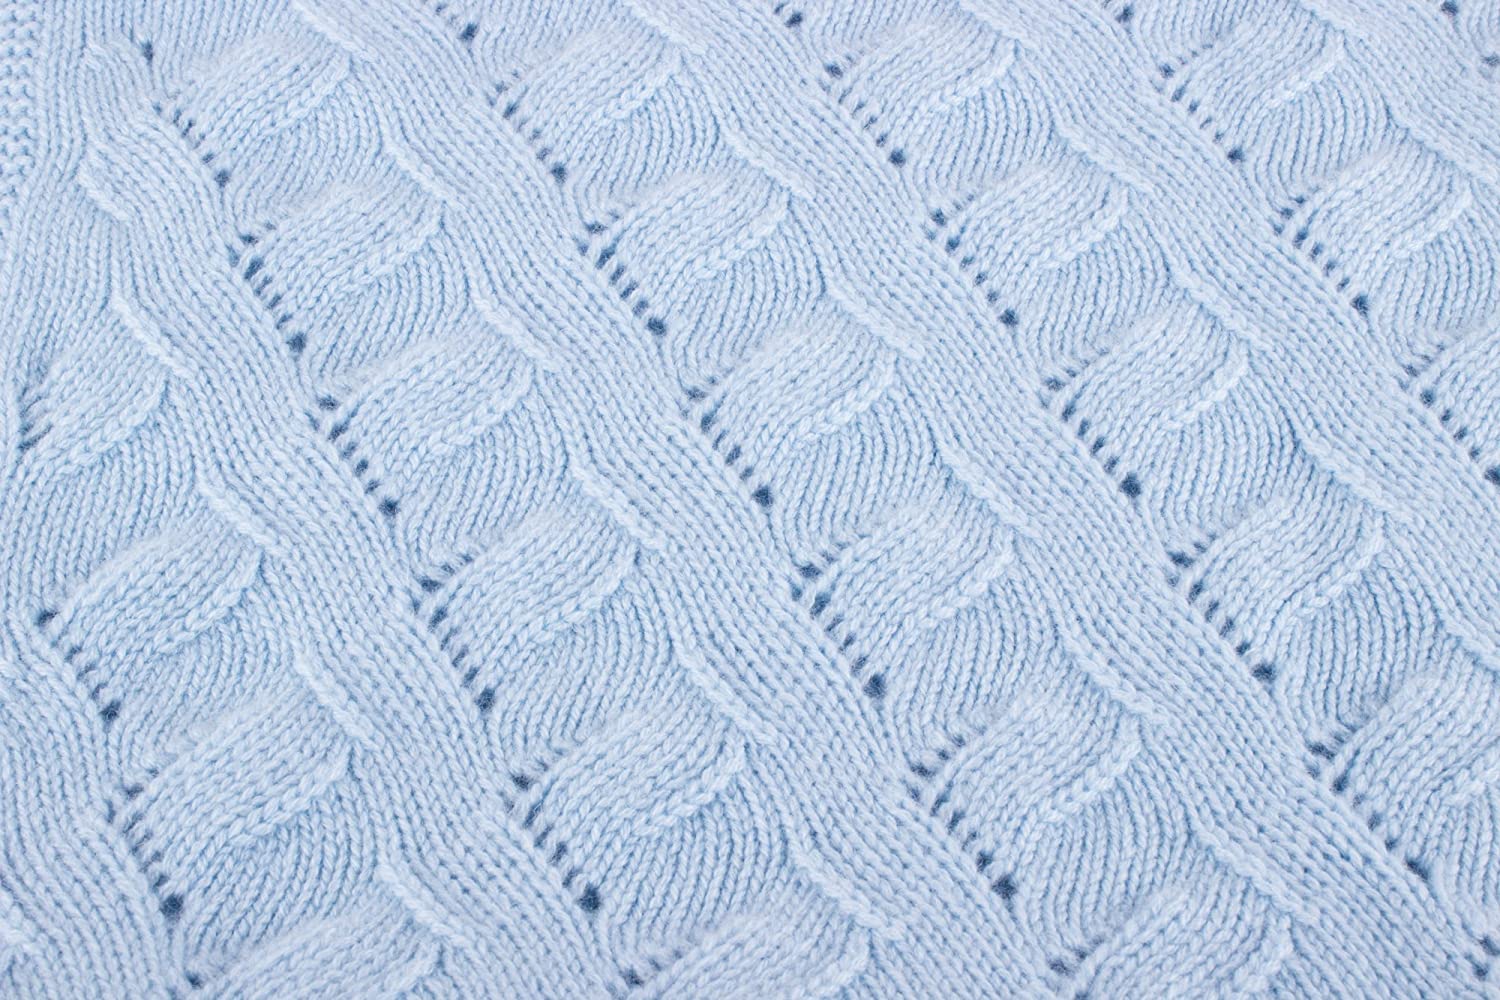 Boys Luxury 100% Cashmere Baby Blanket - 'Baby Blue' - Hand Made in Scotland by Love Cashmere